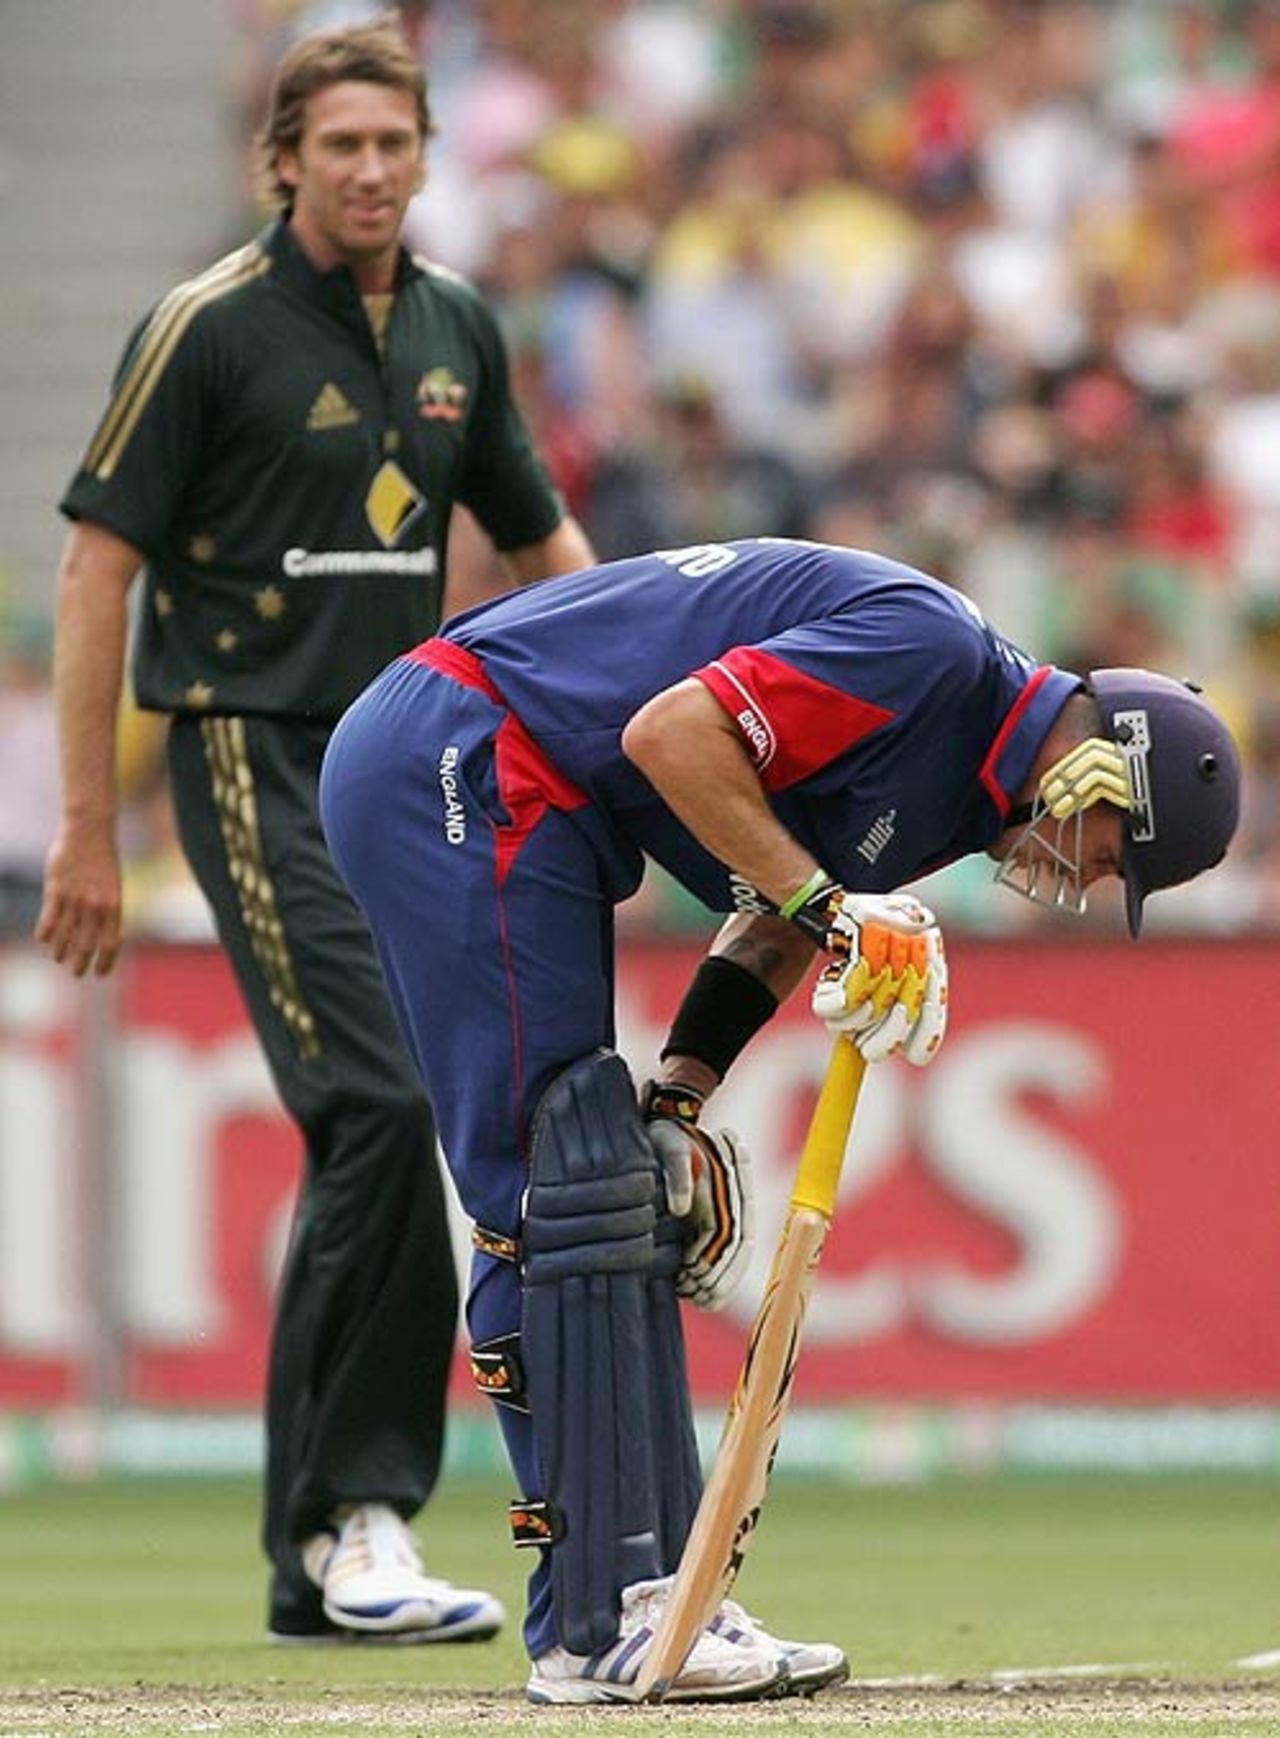 Kevin Pietersen is hurting after Glenn McGrath hit him in the ribs, Australia v England, Commonwealth Bank Series, 1st Match, Melbourne, January 12, 2007